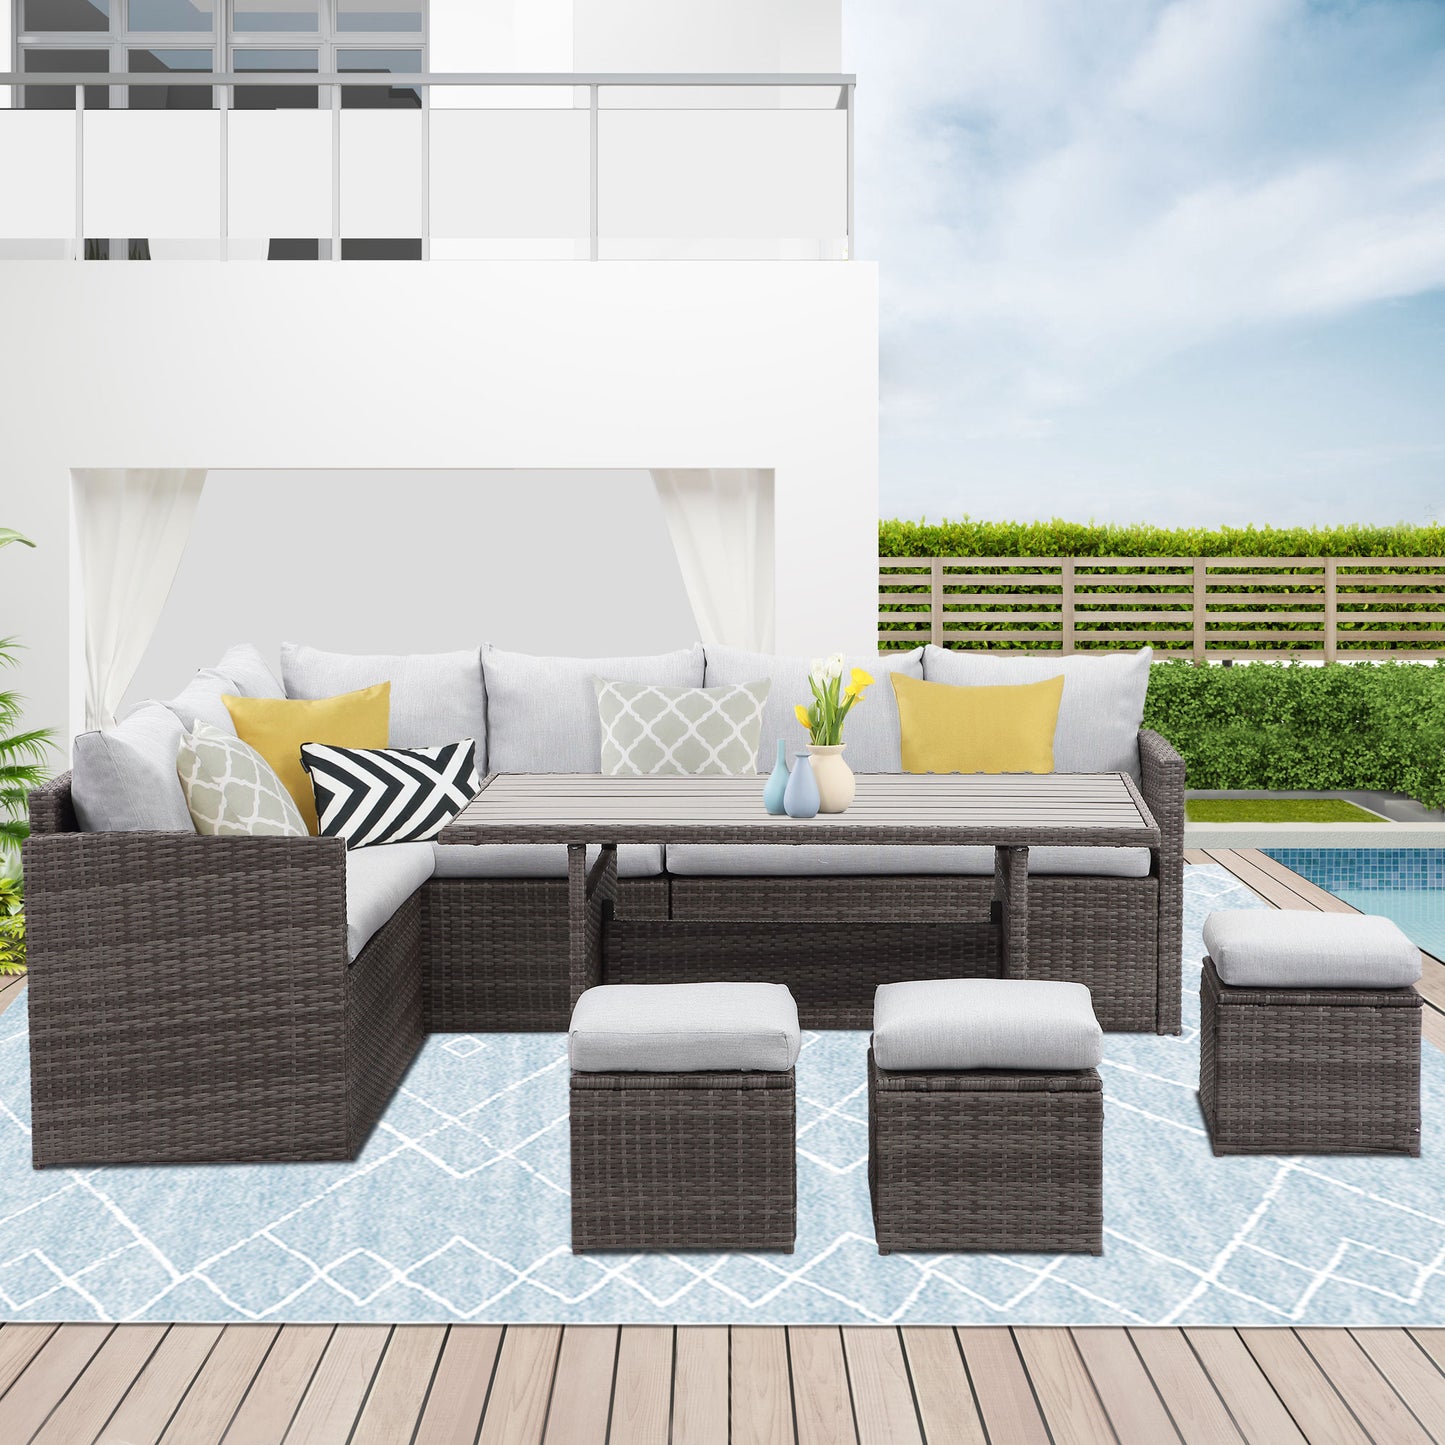 7 PCS Outdoor Dining Table Chair with Ottoman